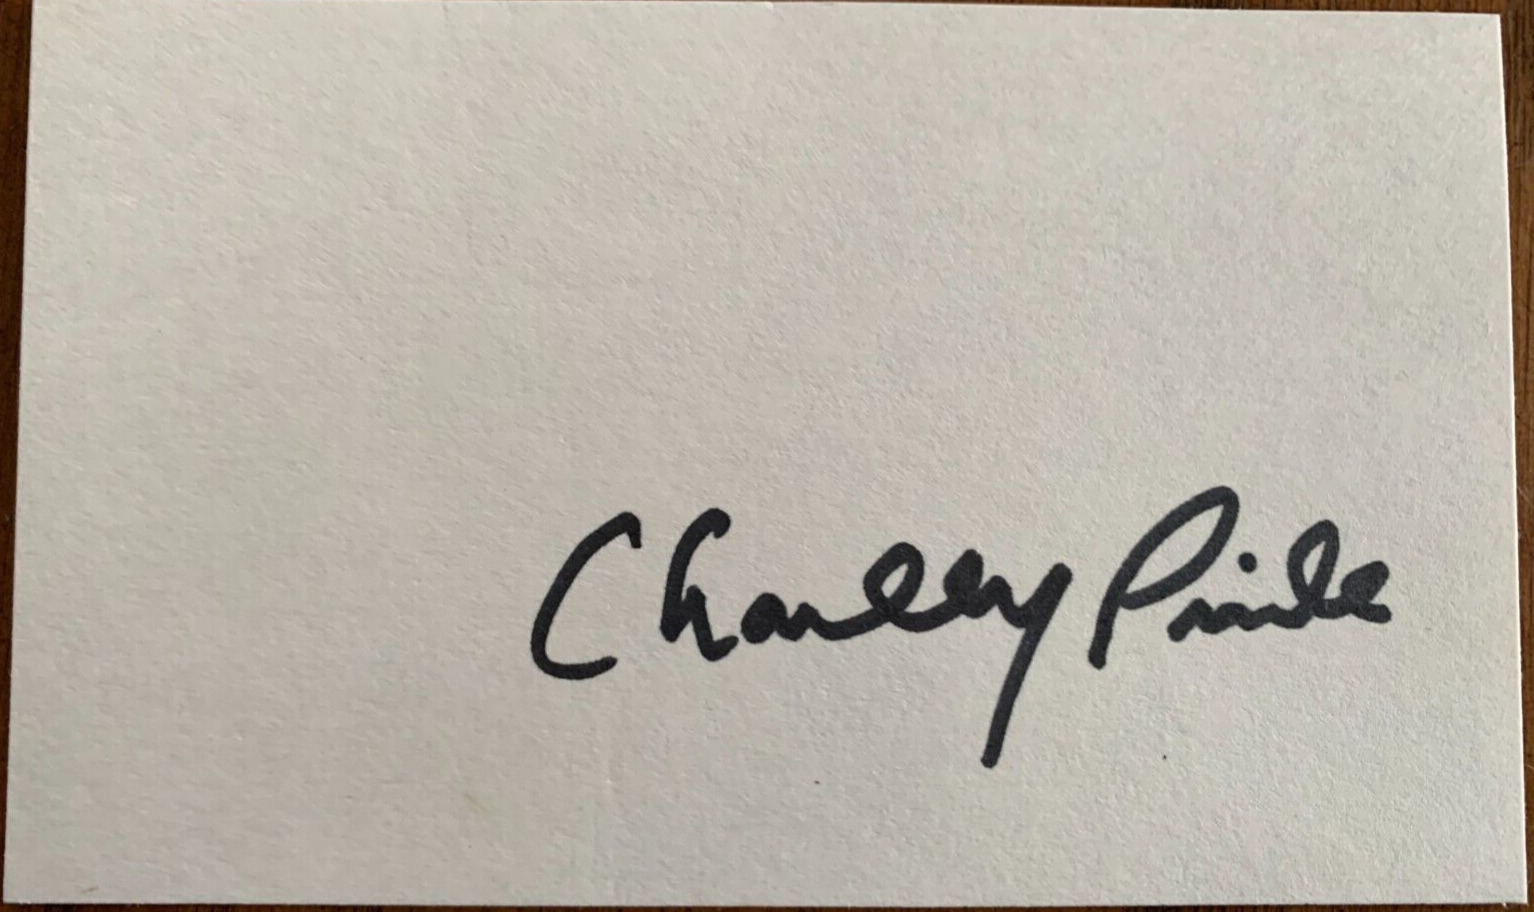 Charley Pride Autograph on Index Card Guaranteed Authentic